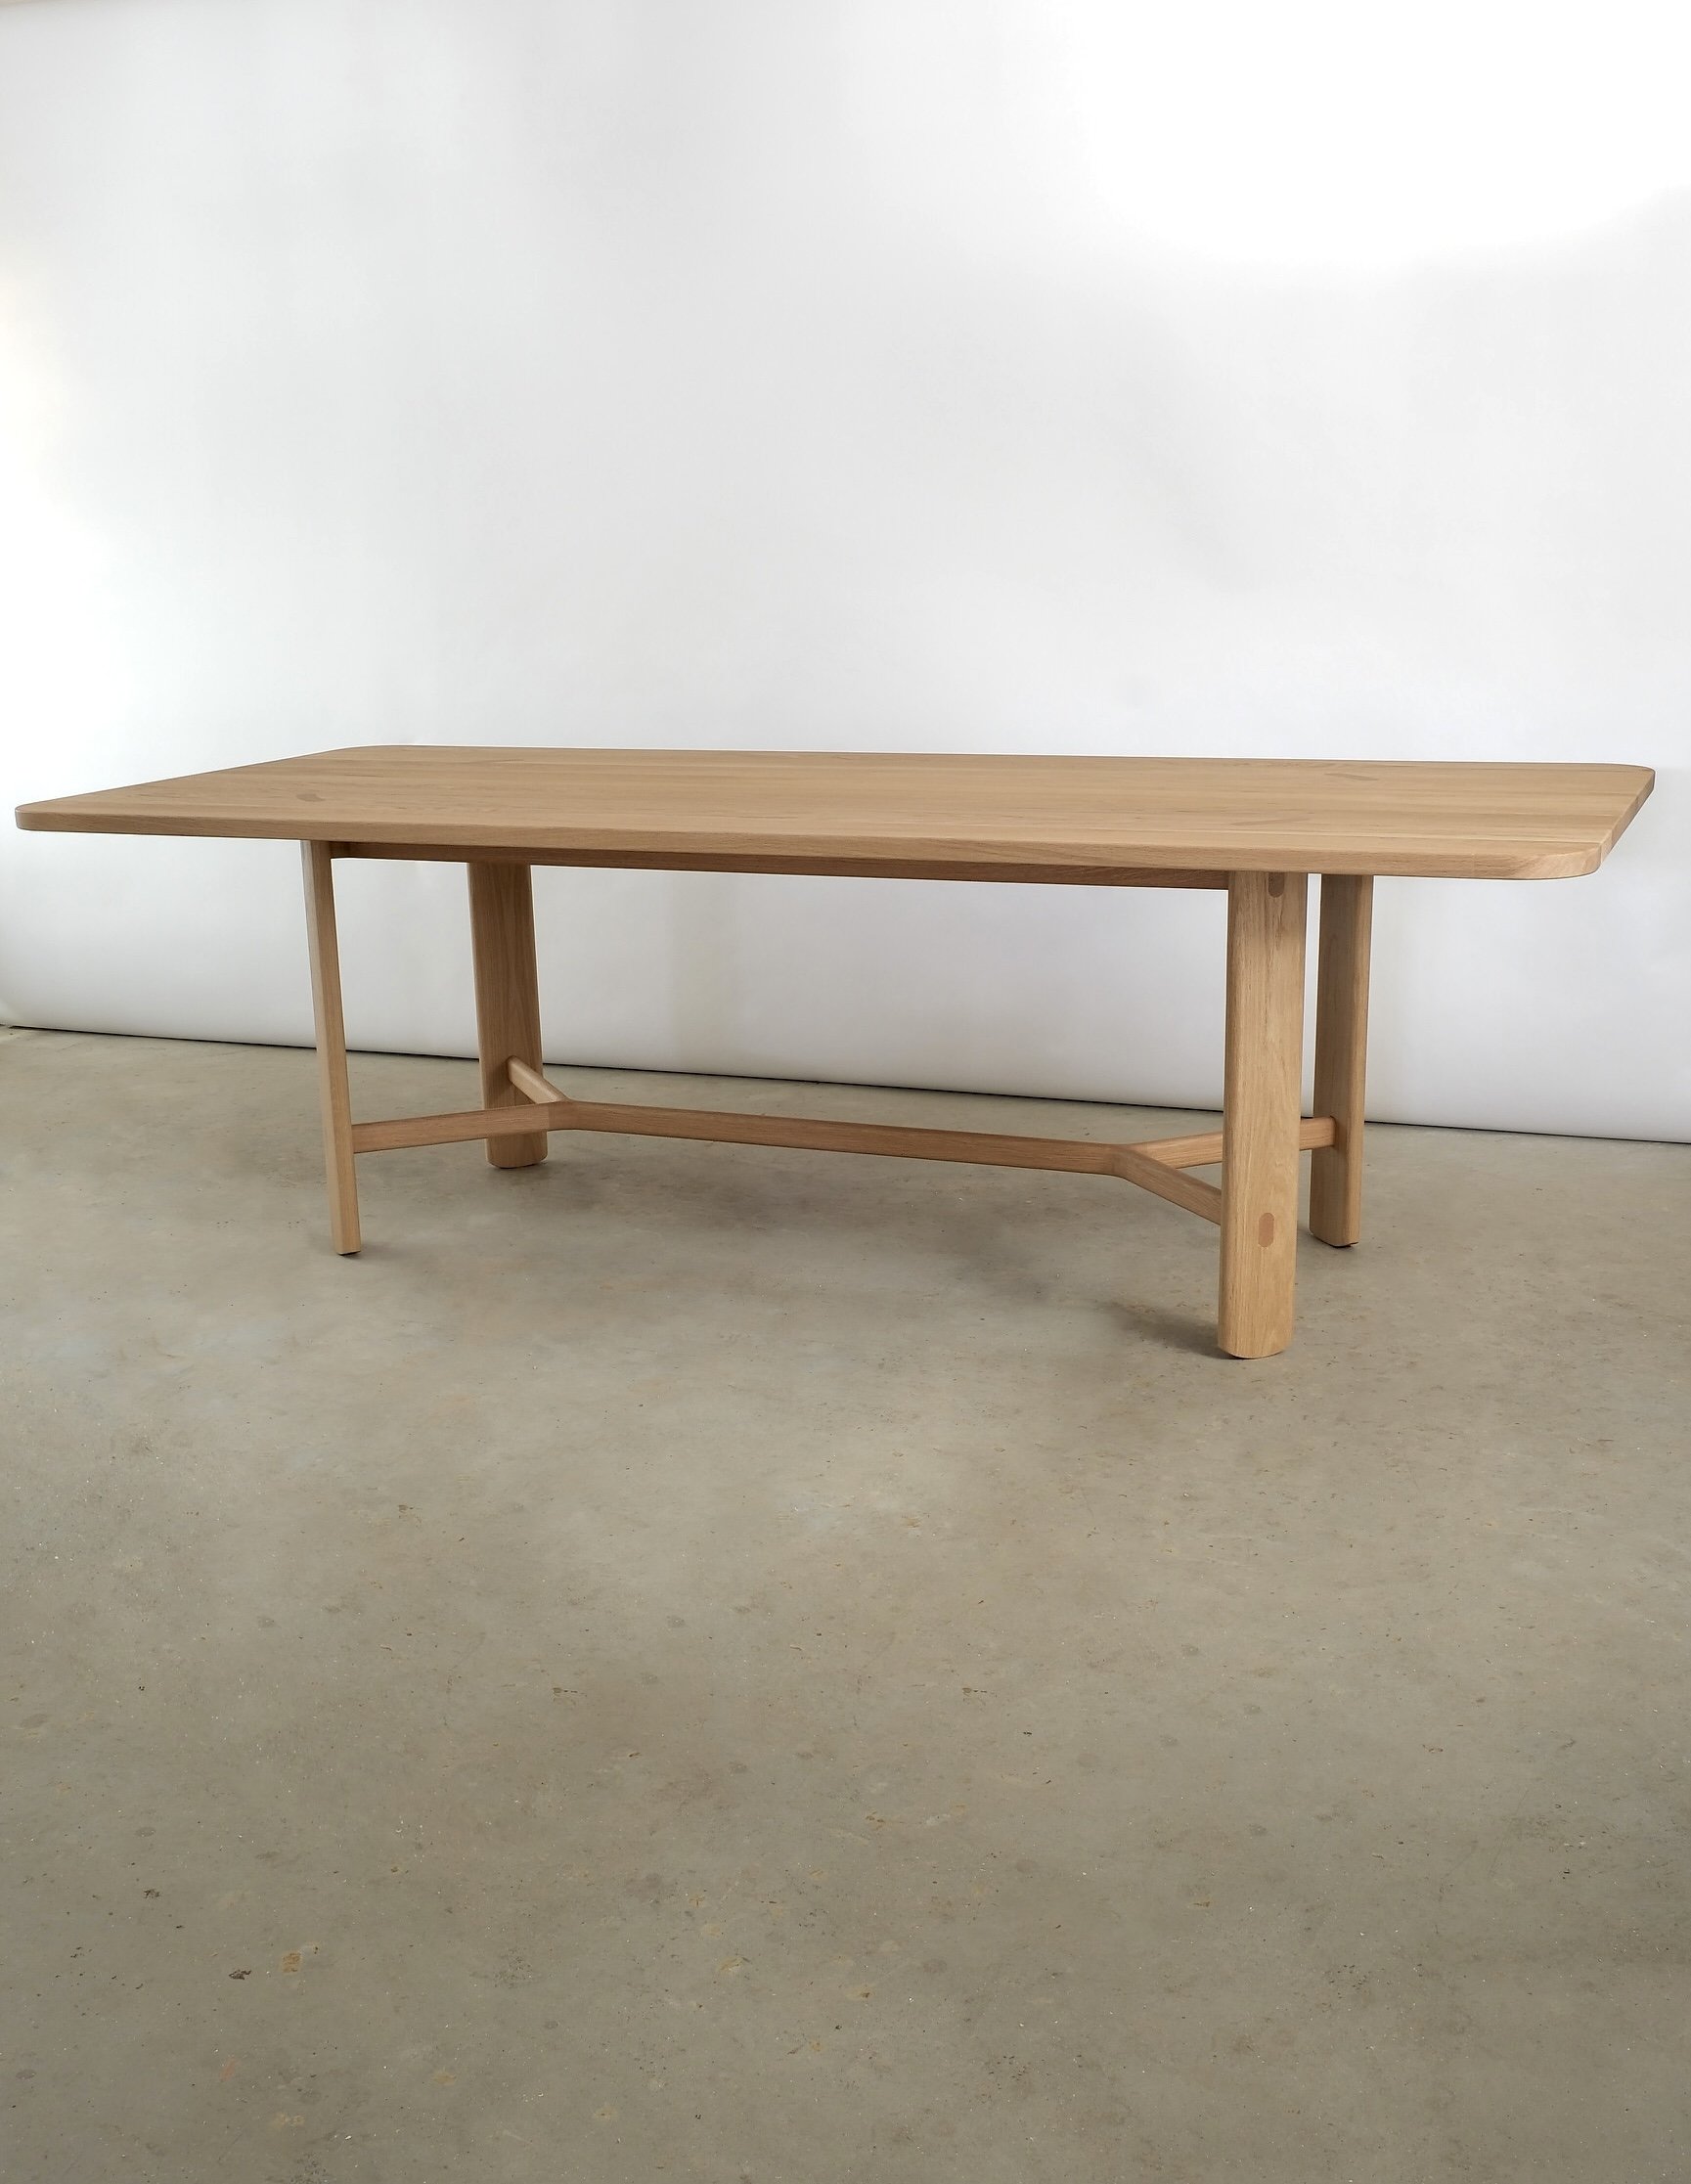 ghent dining table in oak wide view.jpg